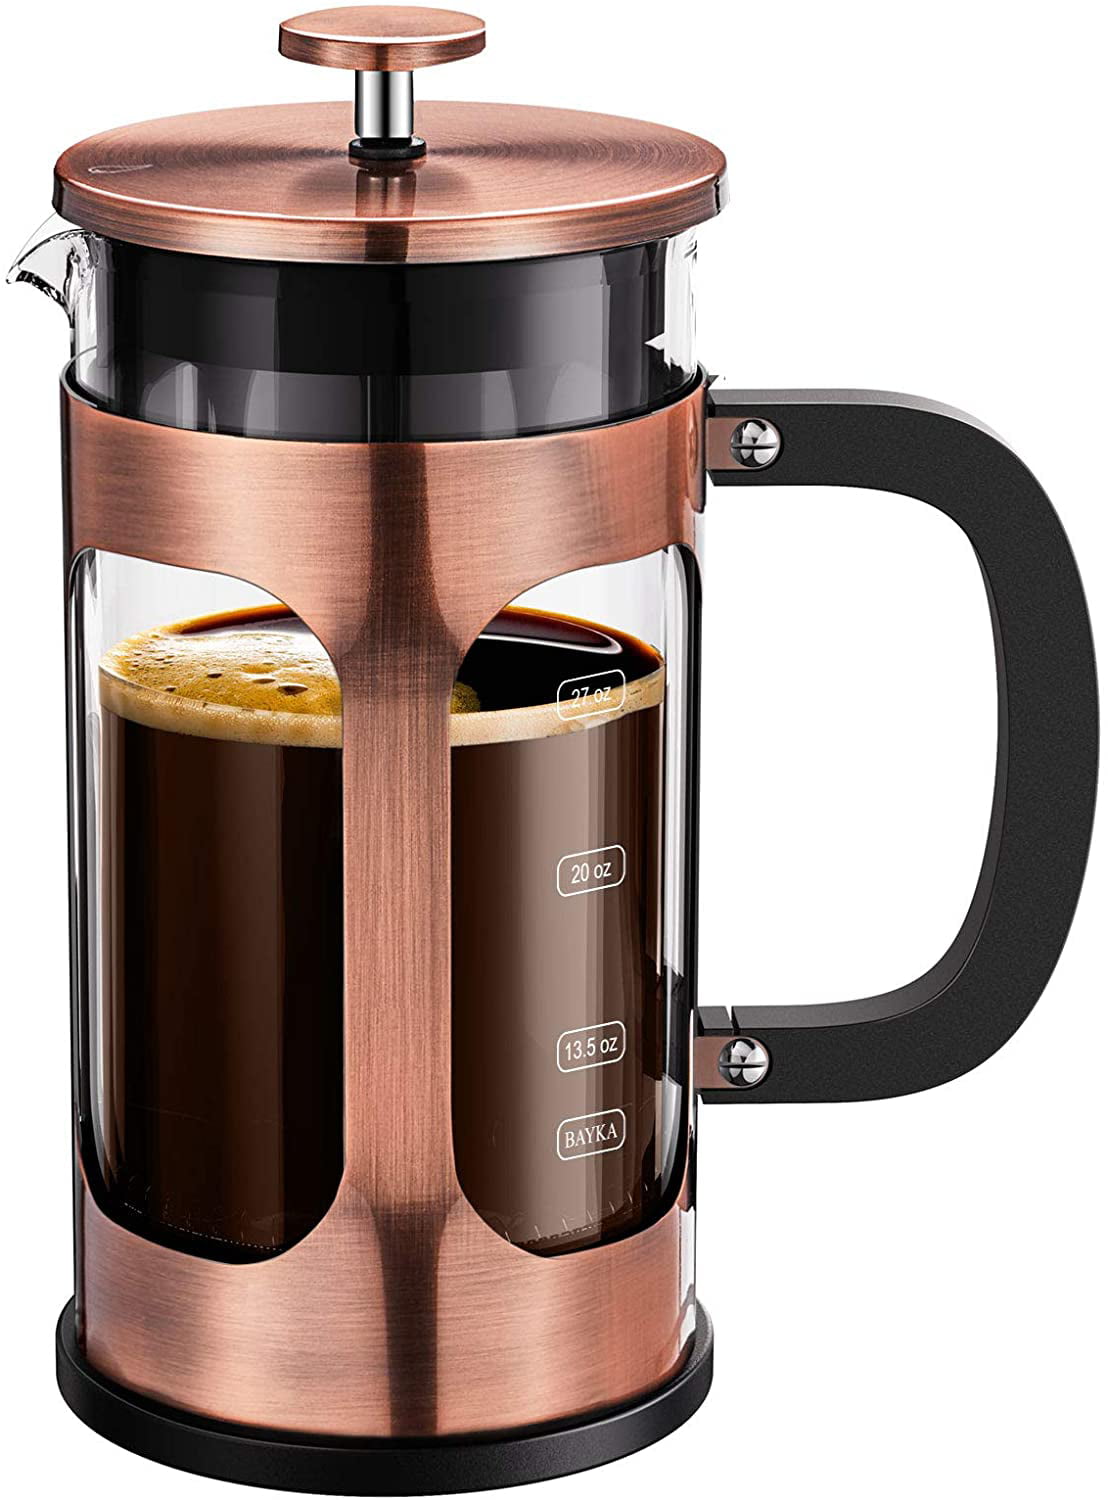 Stanley Adventure All-in-One Stainless Steel Boil + Brew Camping French  Press Coffee Maker, 32 oz 